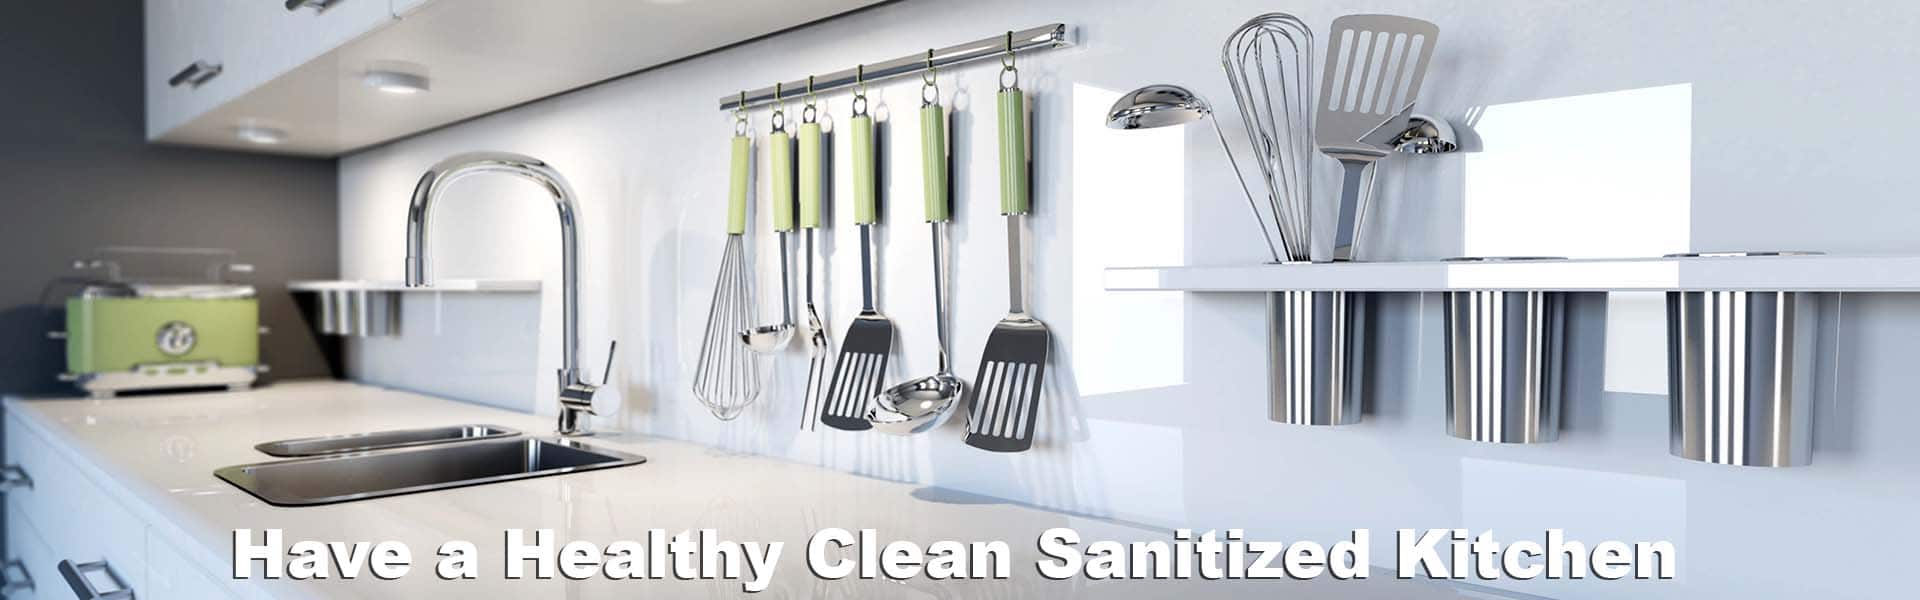 Have a Healthy Clean Sanatized Kitchen